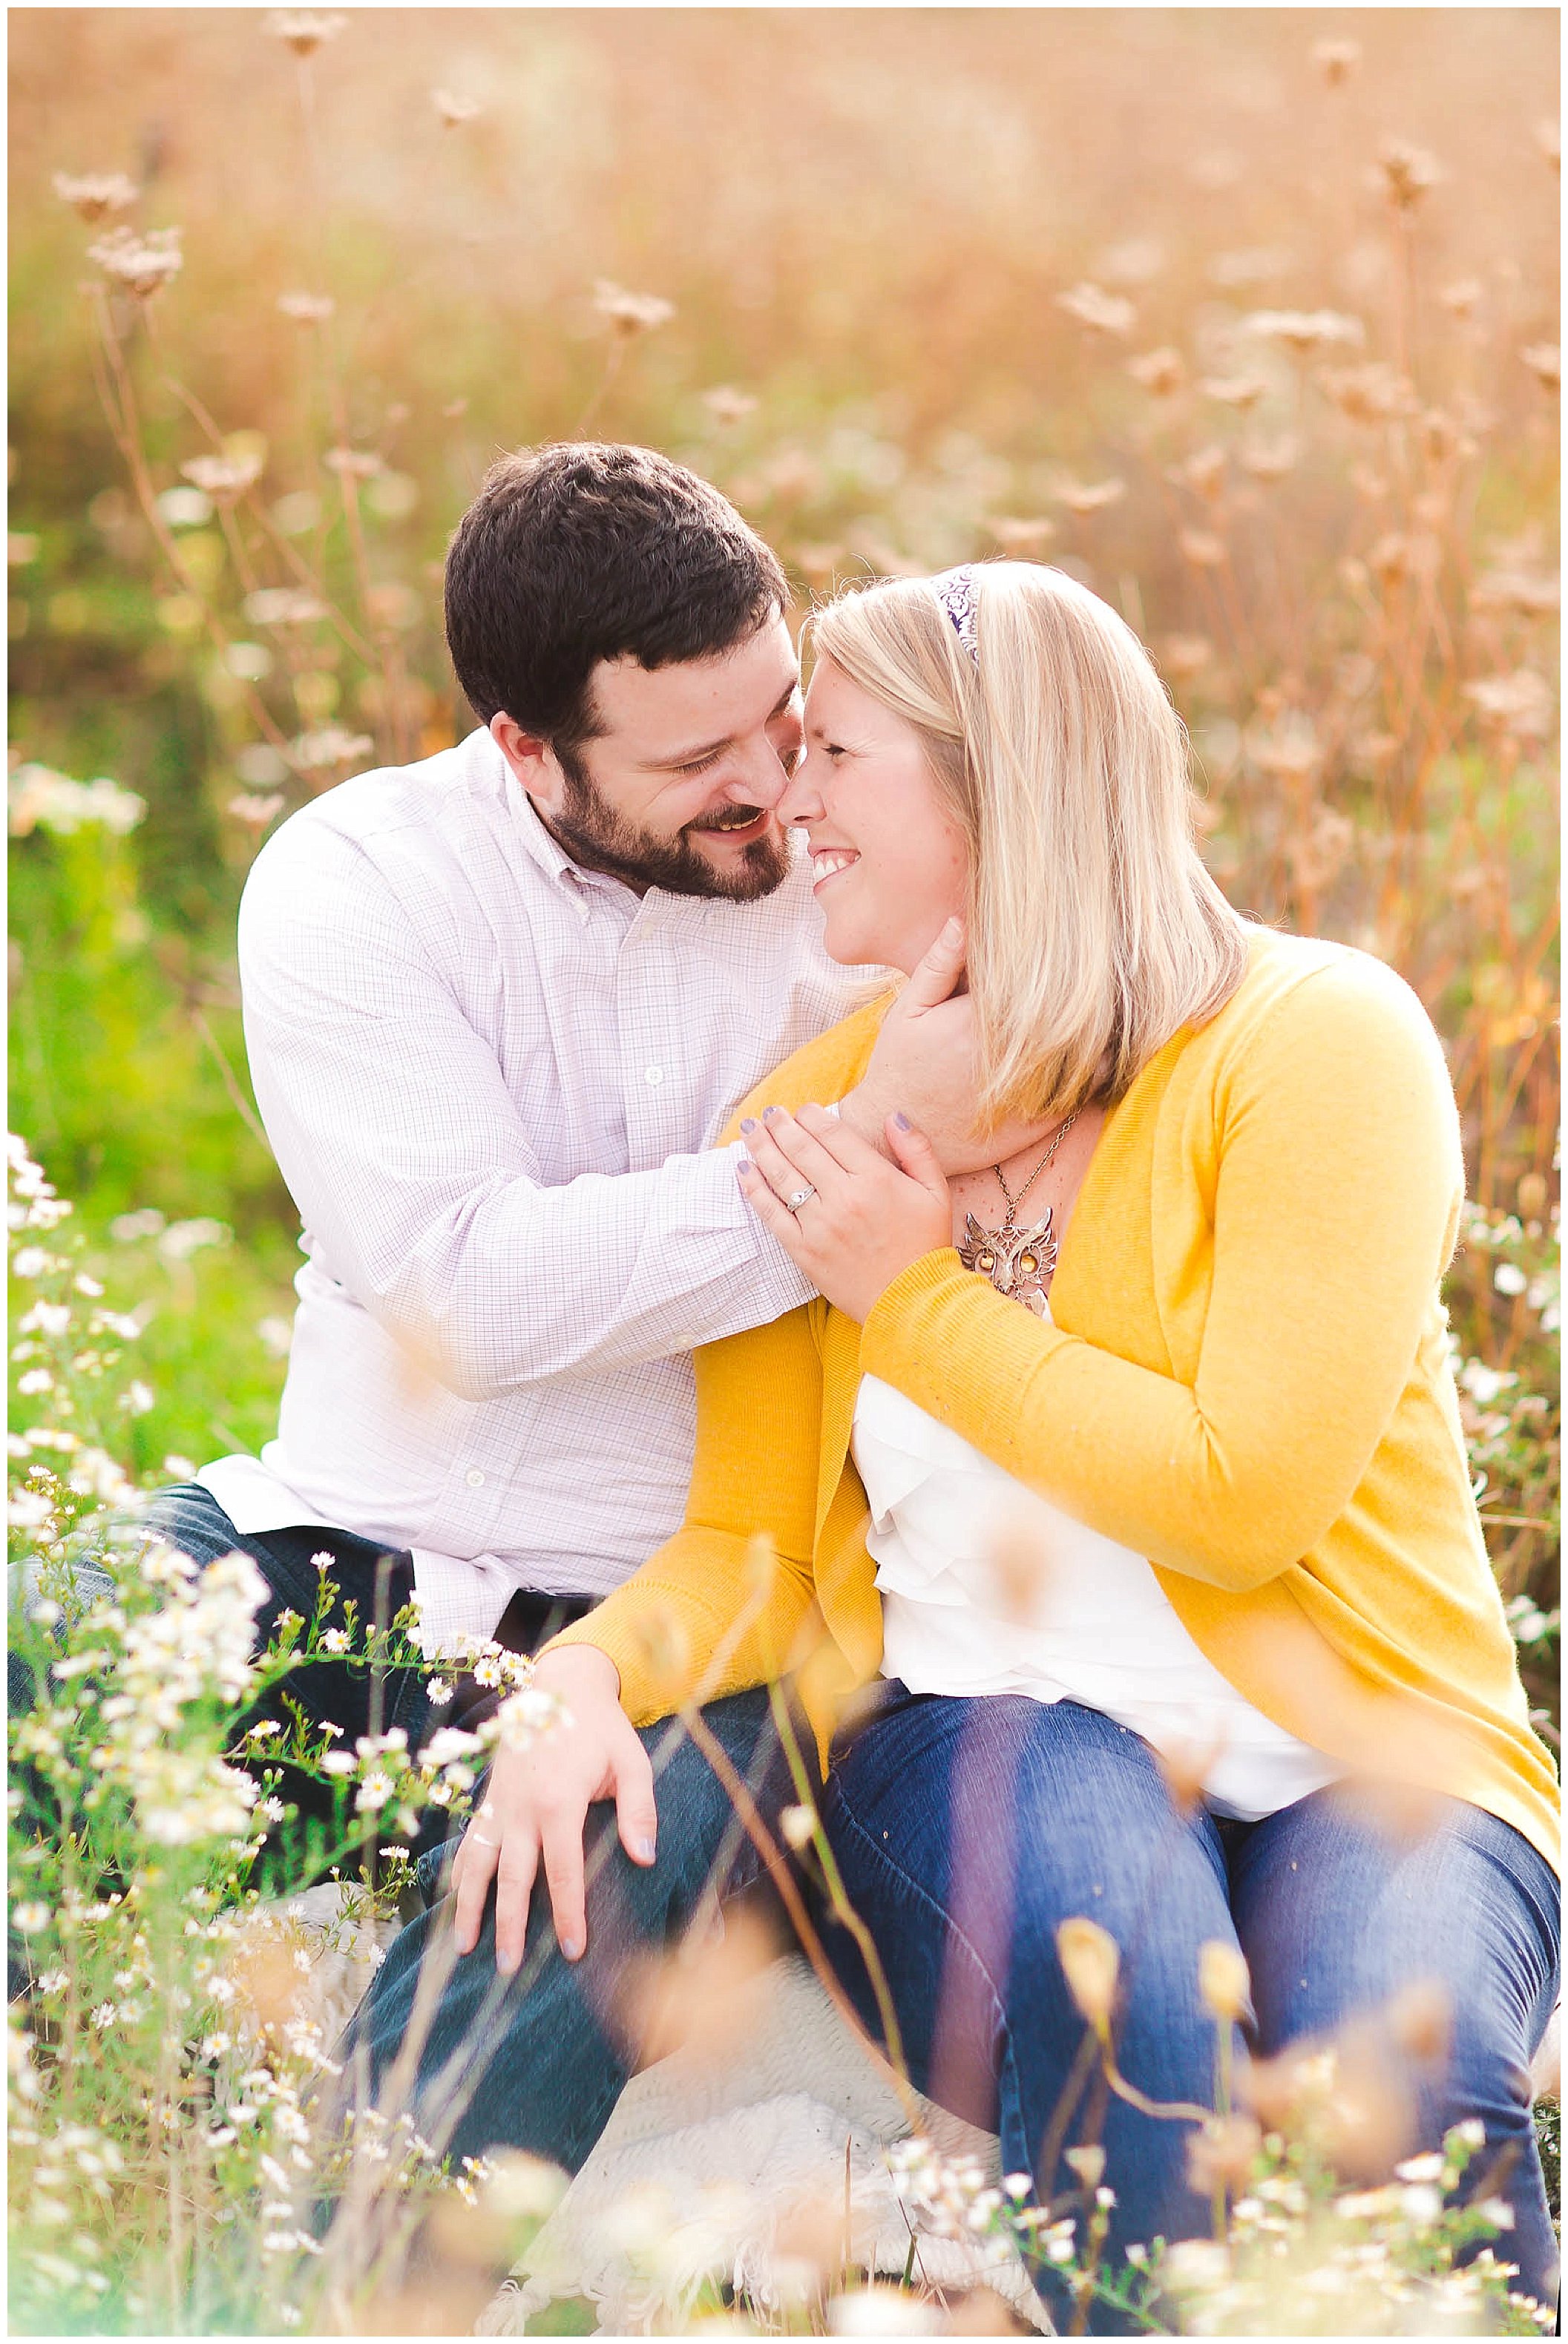 Sunshine filled engagement session in a field of wildflowers, Fort Wayne Indiana Wedding Photographer_0005.jpg